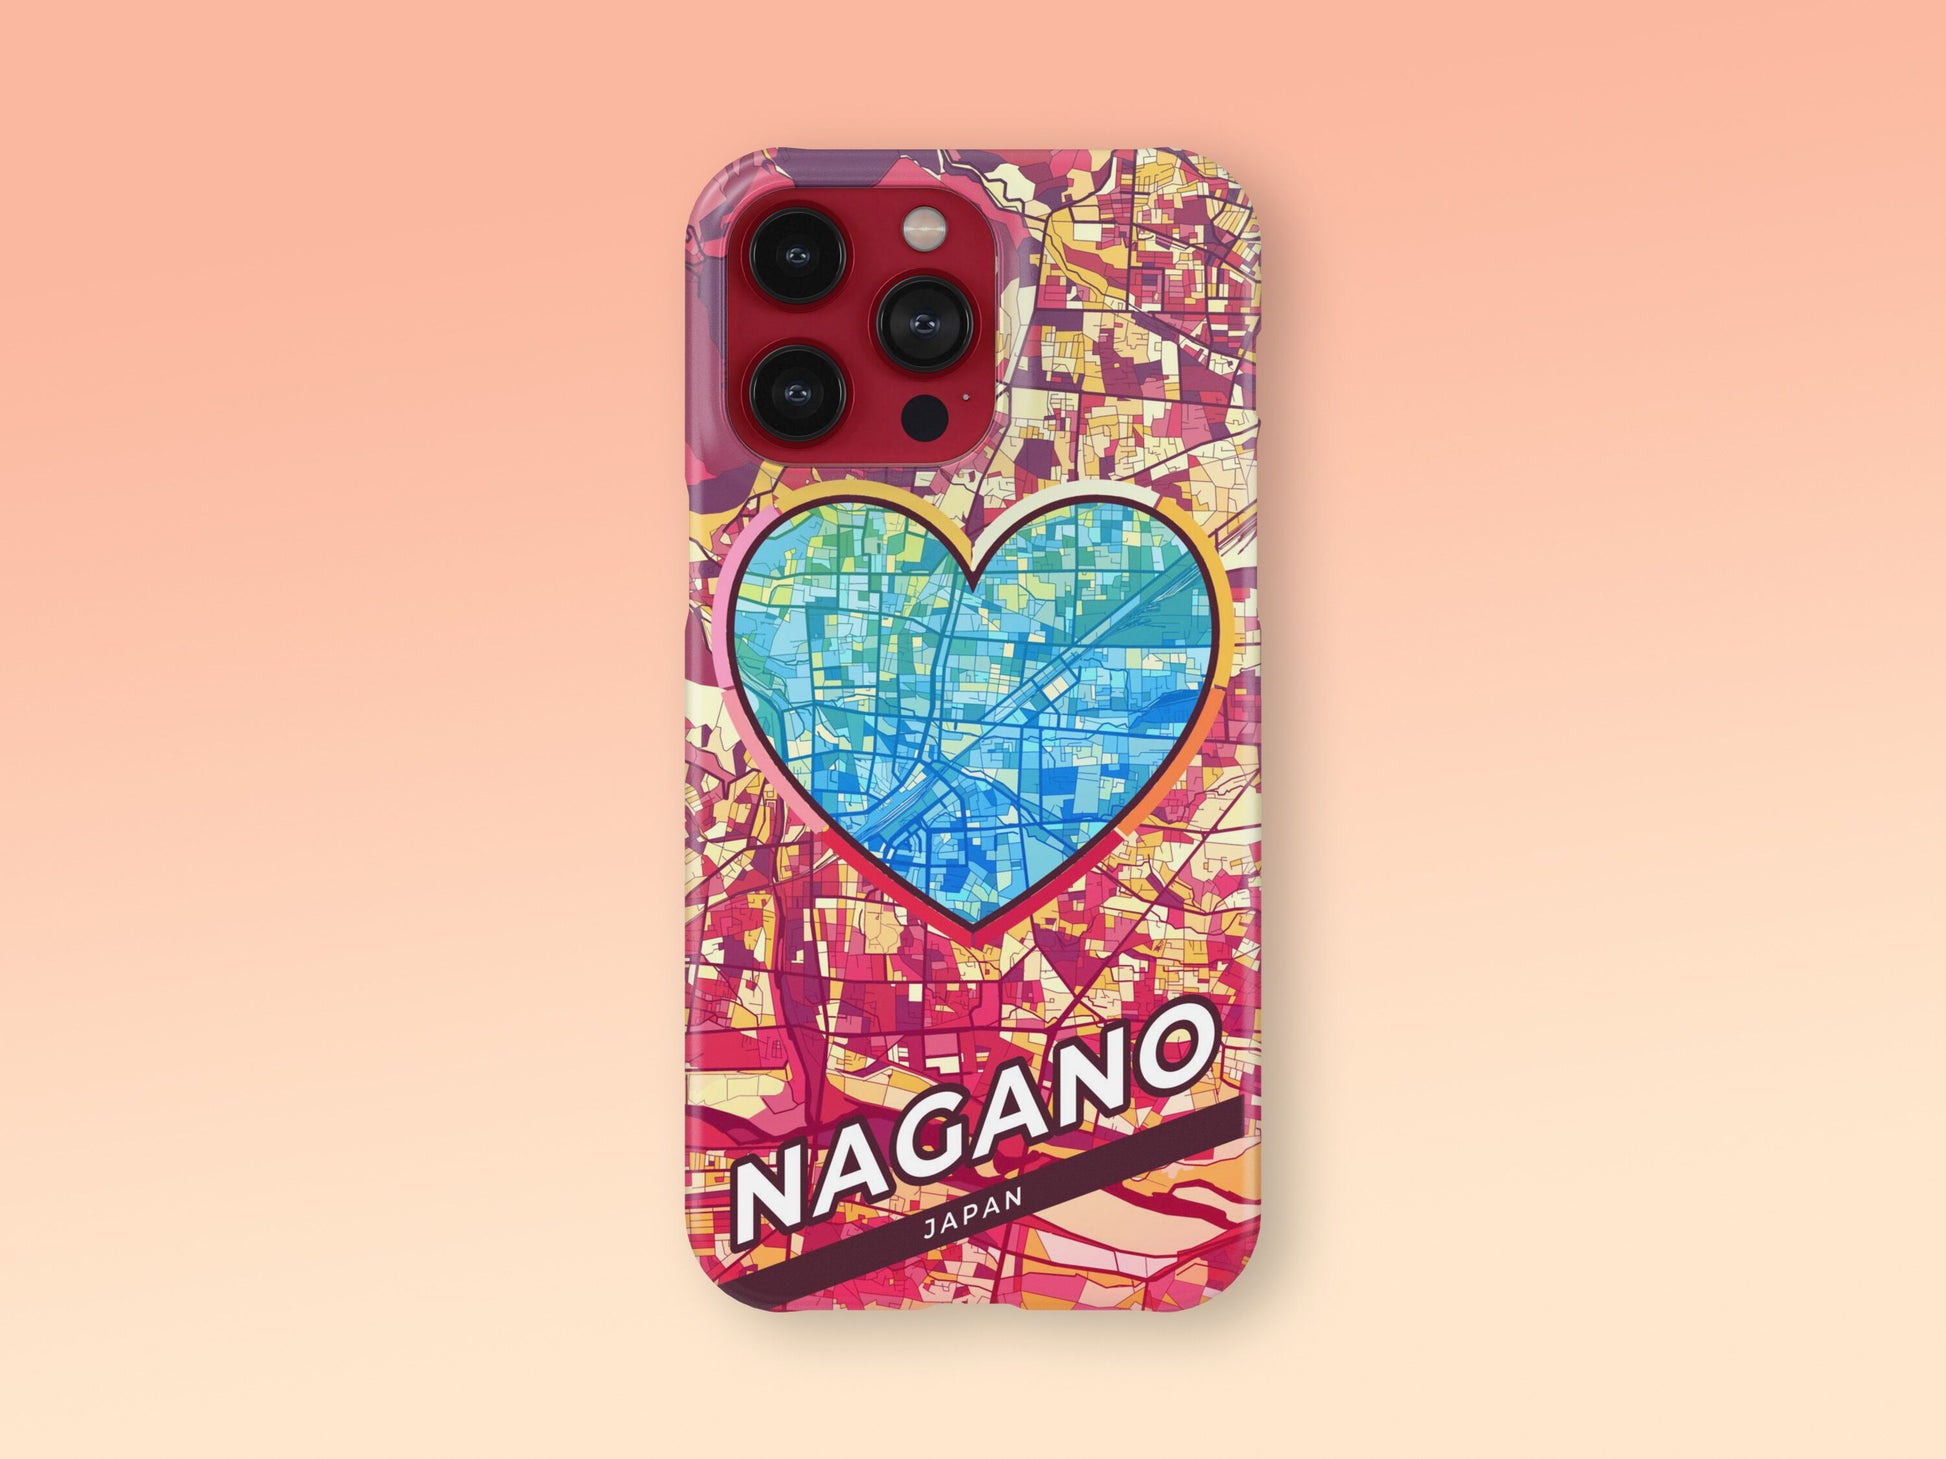 Nagano Japan slim phone case with colorful icon 2